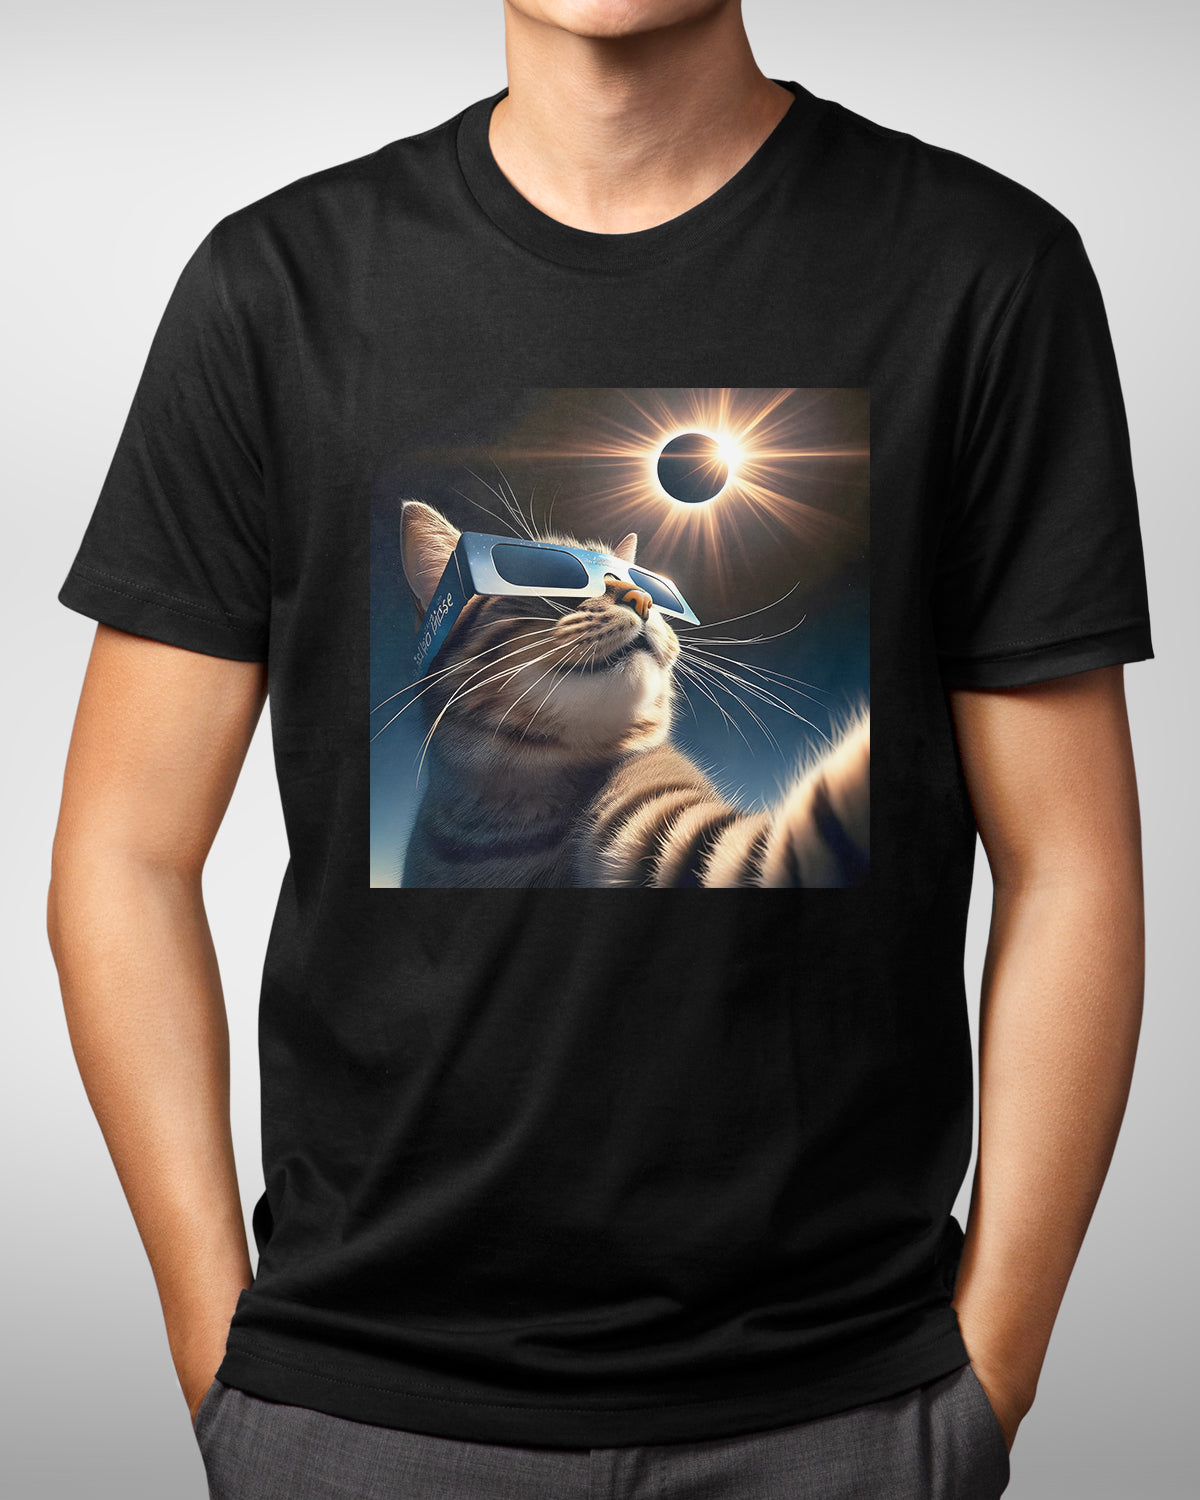 2024 Total Solar Eclipse Cat Selfie Shirt, Funny Cat Wearing Eclipse Glasses Tee, Astronomy Souvenir, April 8th Totality Event Gift